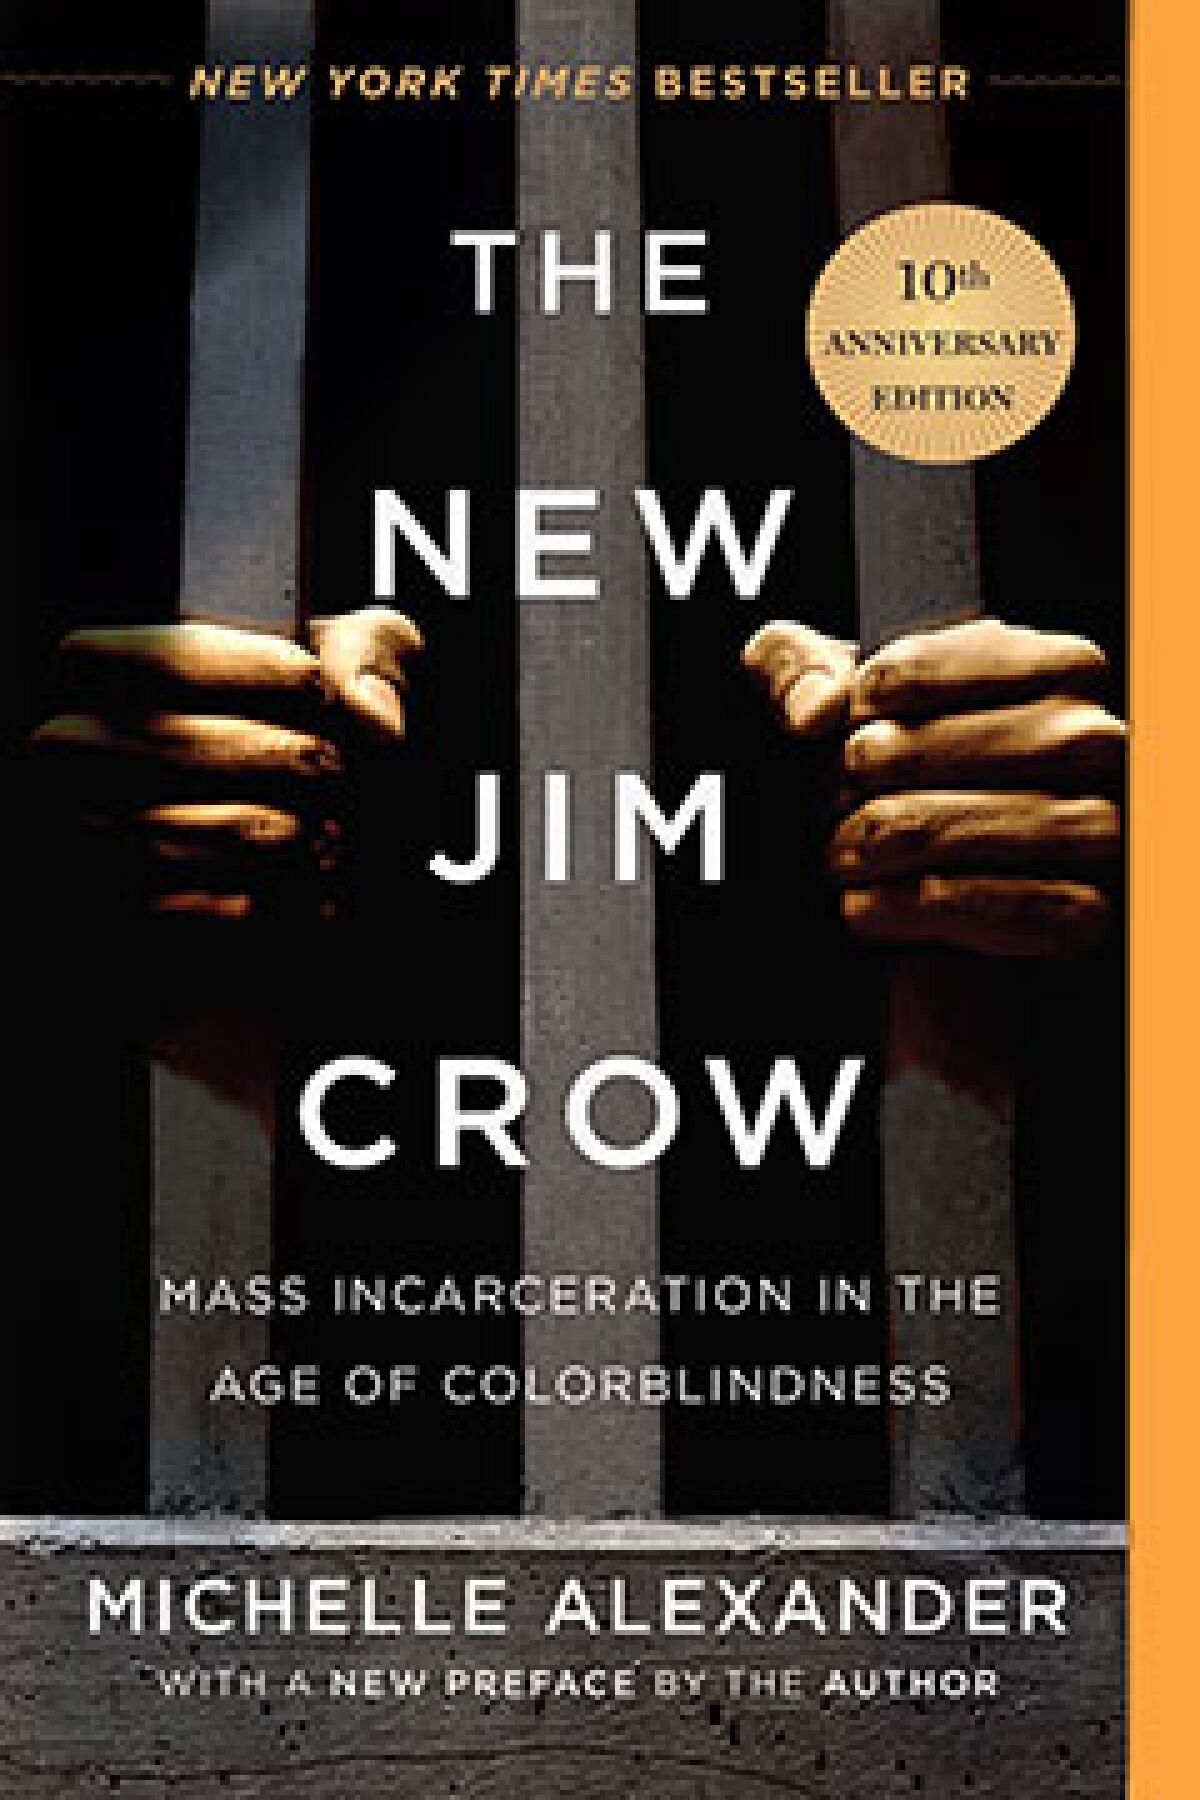 "The New Jim Crow: Mass Incarceration in the Age of Colorblindness" by Michelle Alexander